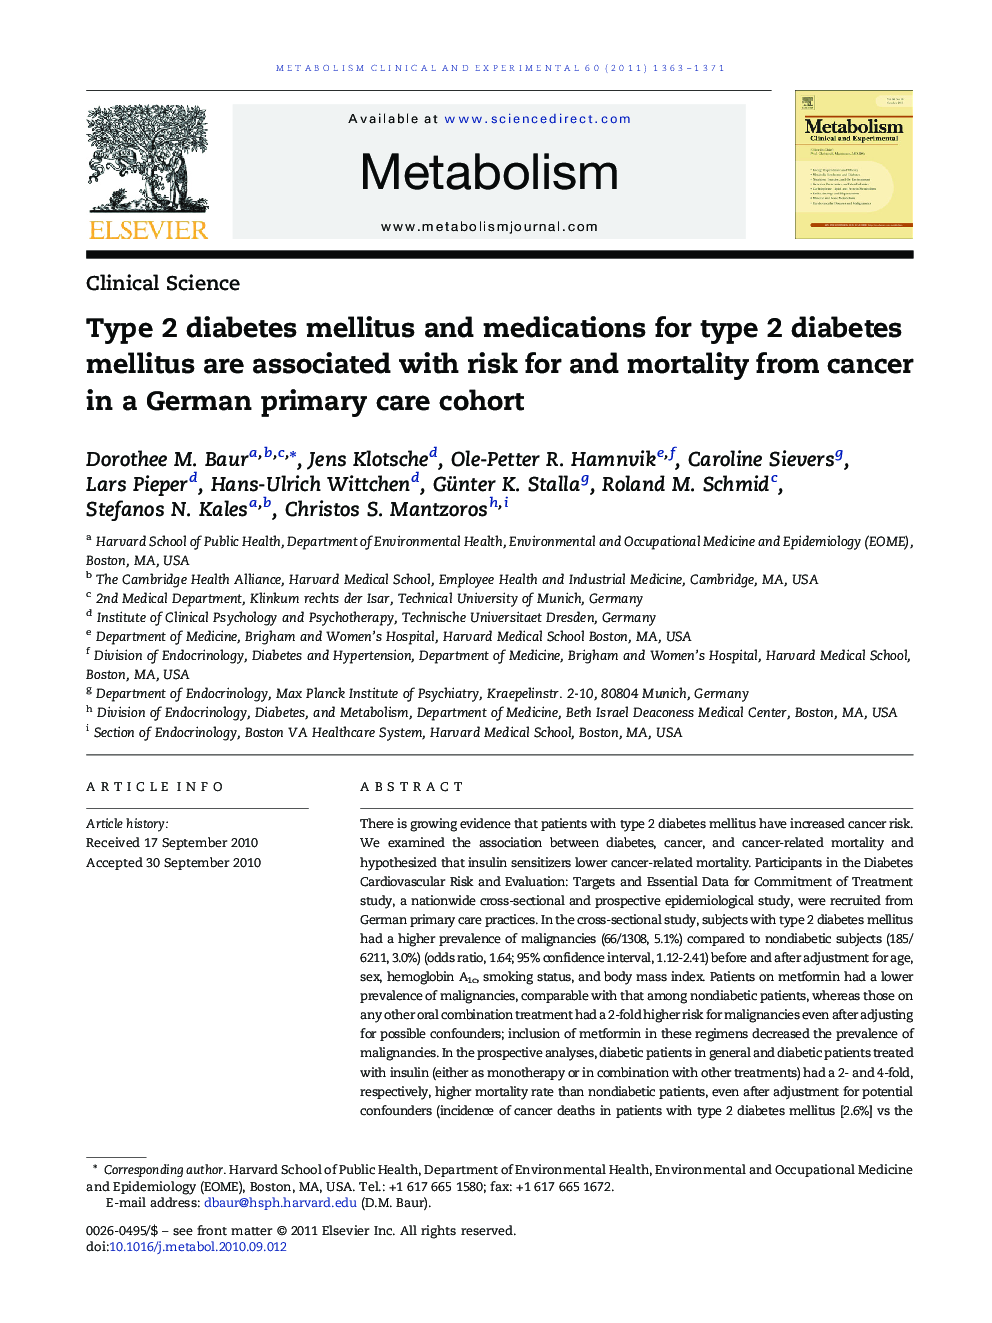 Type 2 diabetes mellitus and medications for type 2 diabetes mellitus are associated with risk for and mortality from cancer in a German primary care cohort